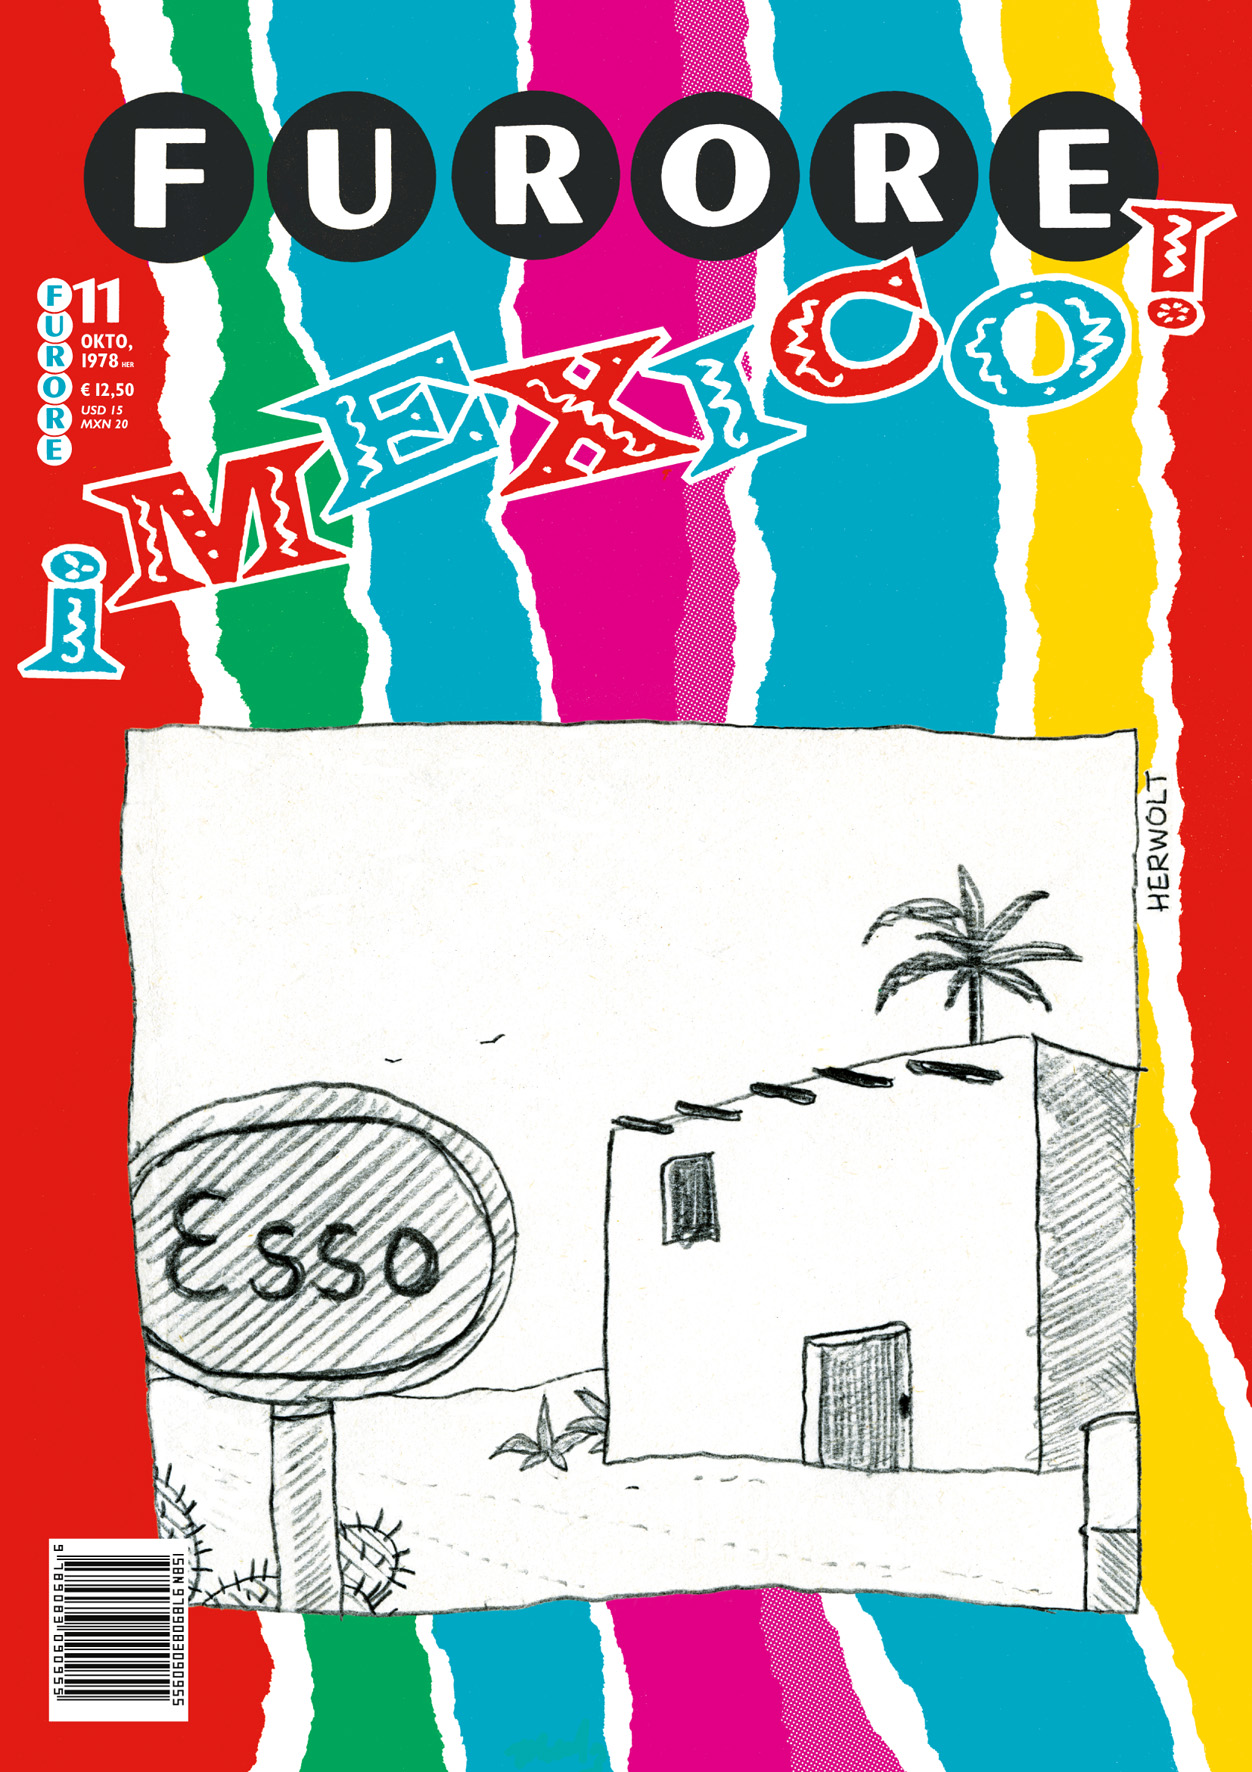 Mexico issue reprinted!